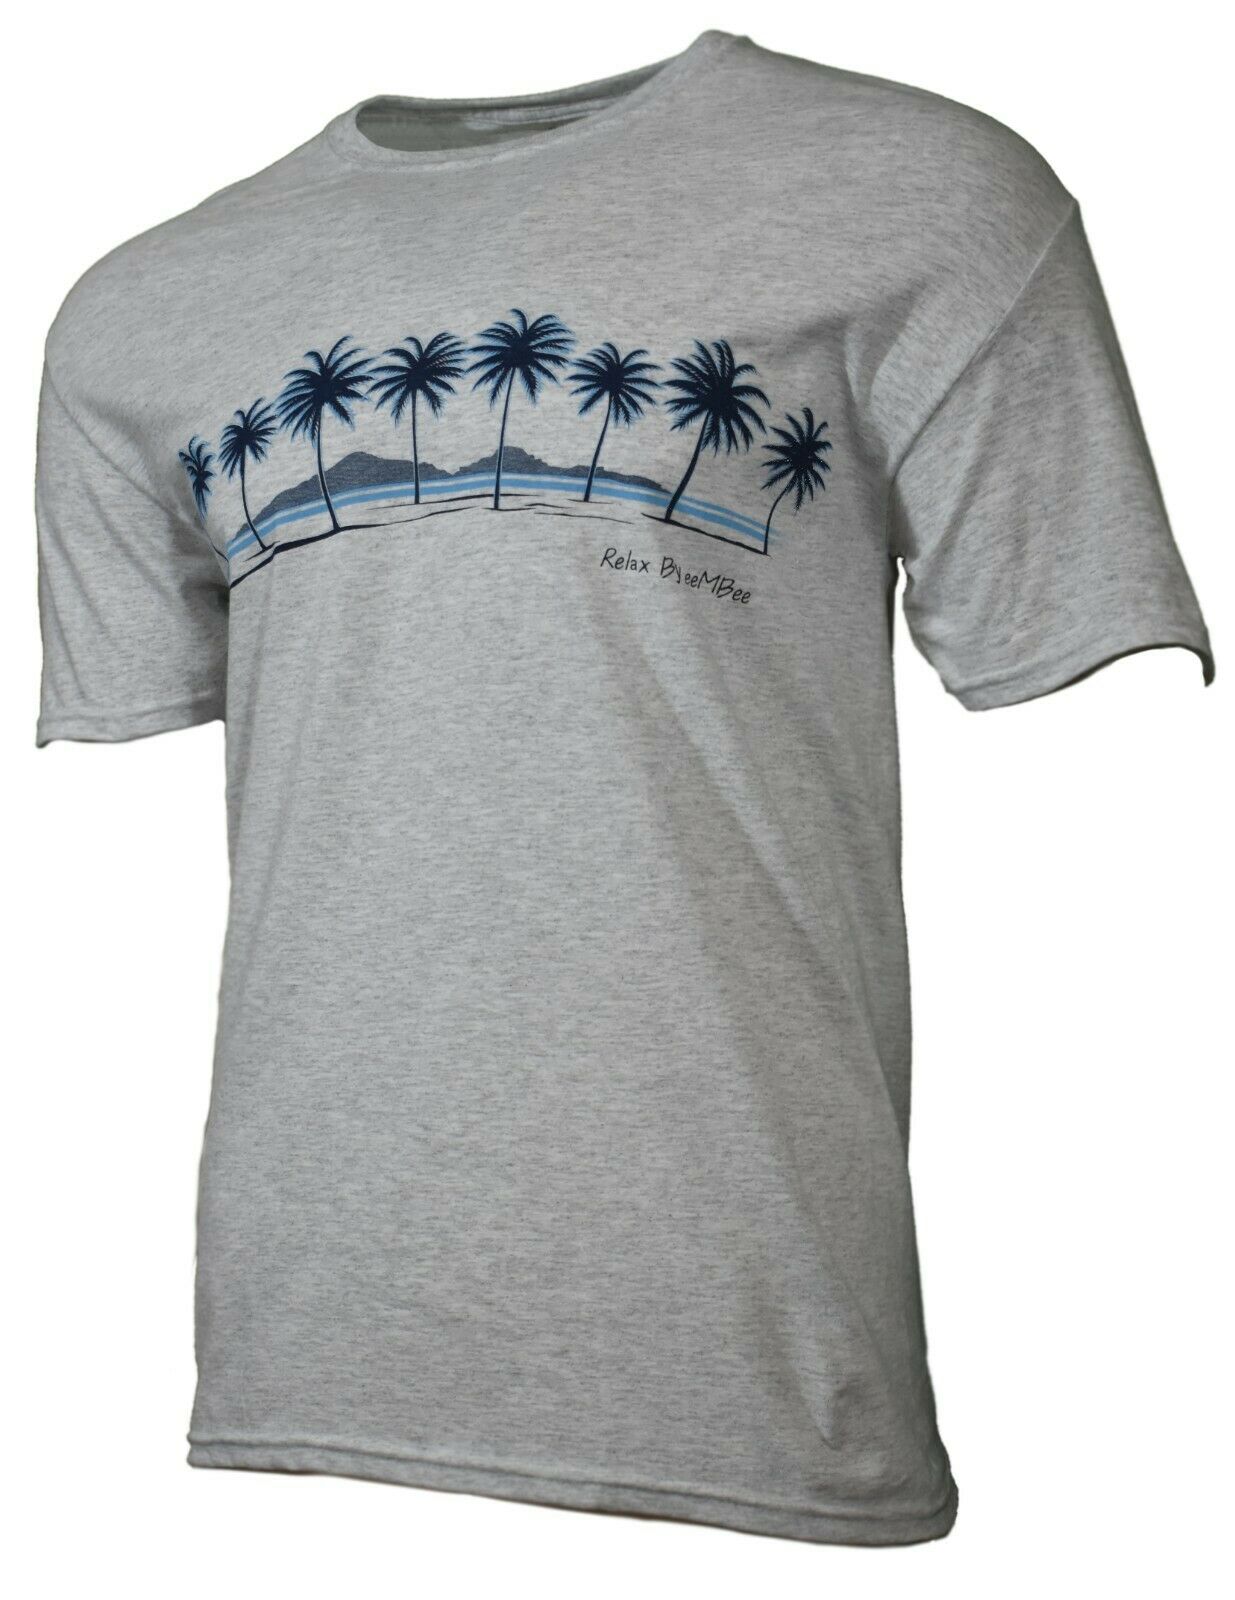 Men's T-Shirt Bahama Beach Palm Trees Sunset Relax by eeMBee